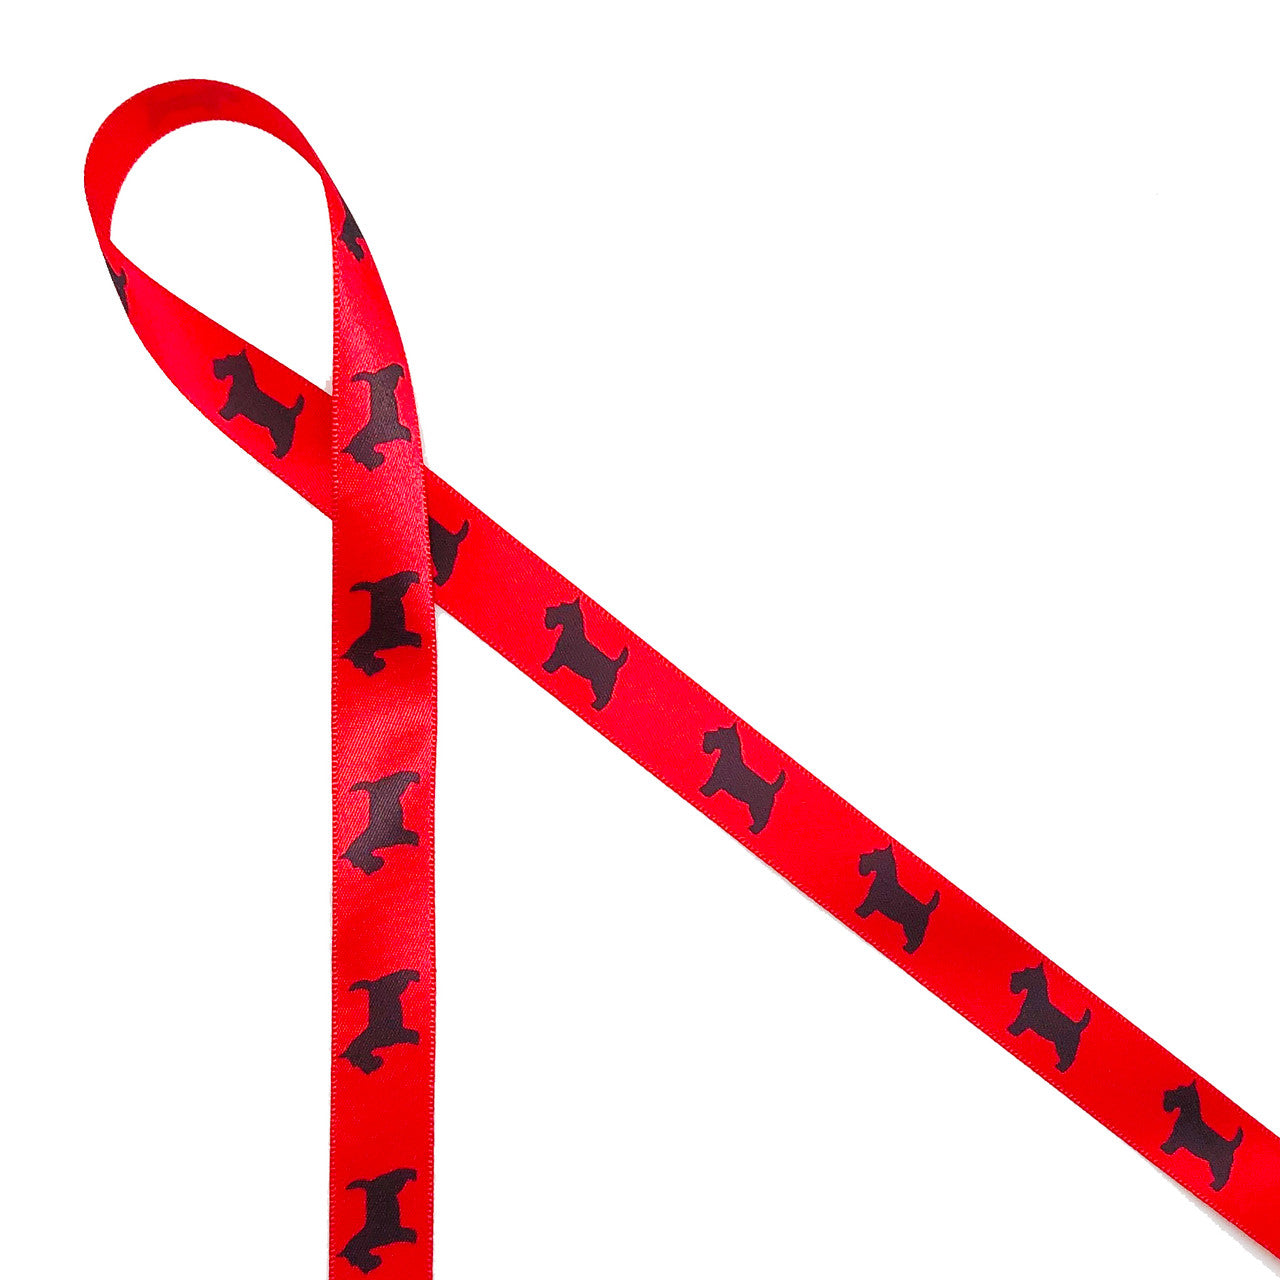 Scottie dogs in black silhouette printed on 5/8" red single face satin ribbon makes for a fun addition to any gift for that special pup or the dog lover in your life! Our ribbon is designed and printed in the USA